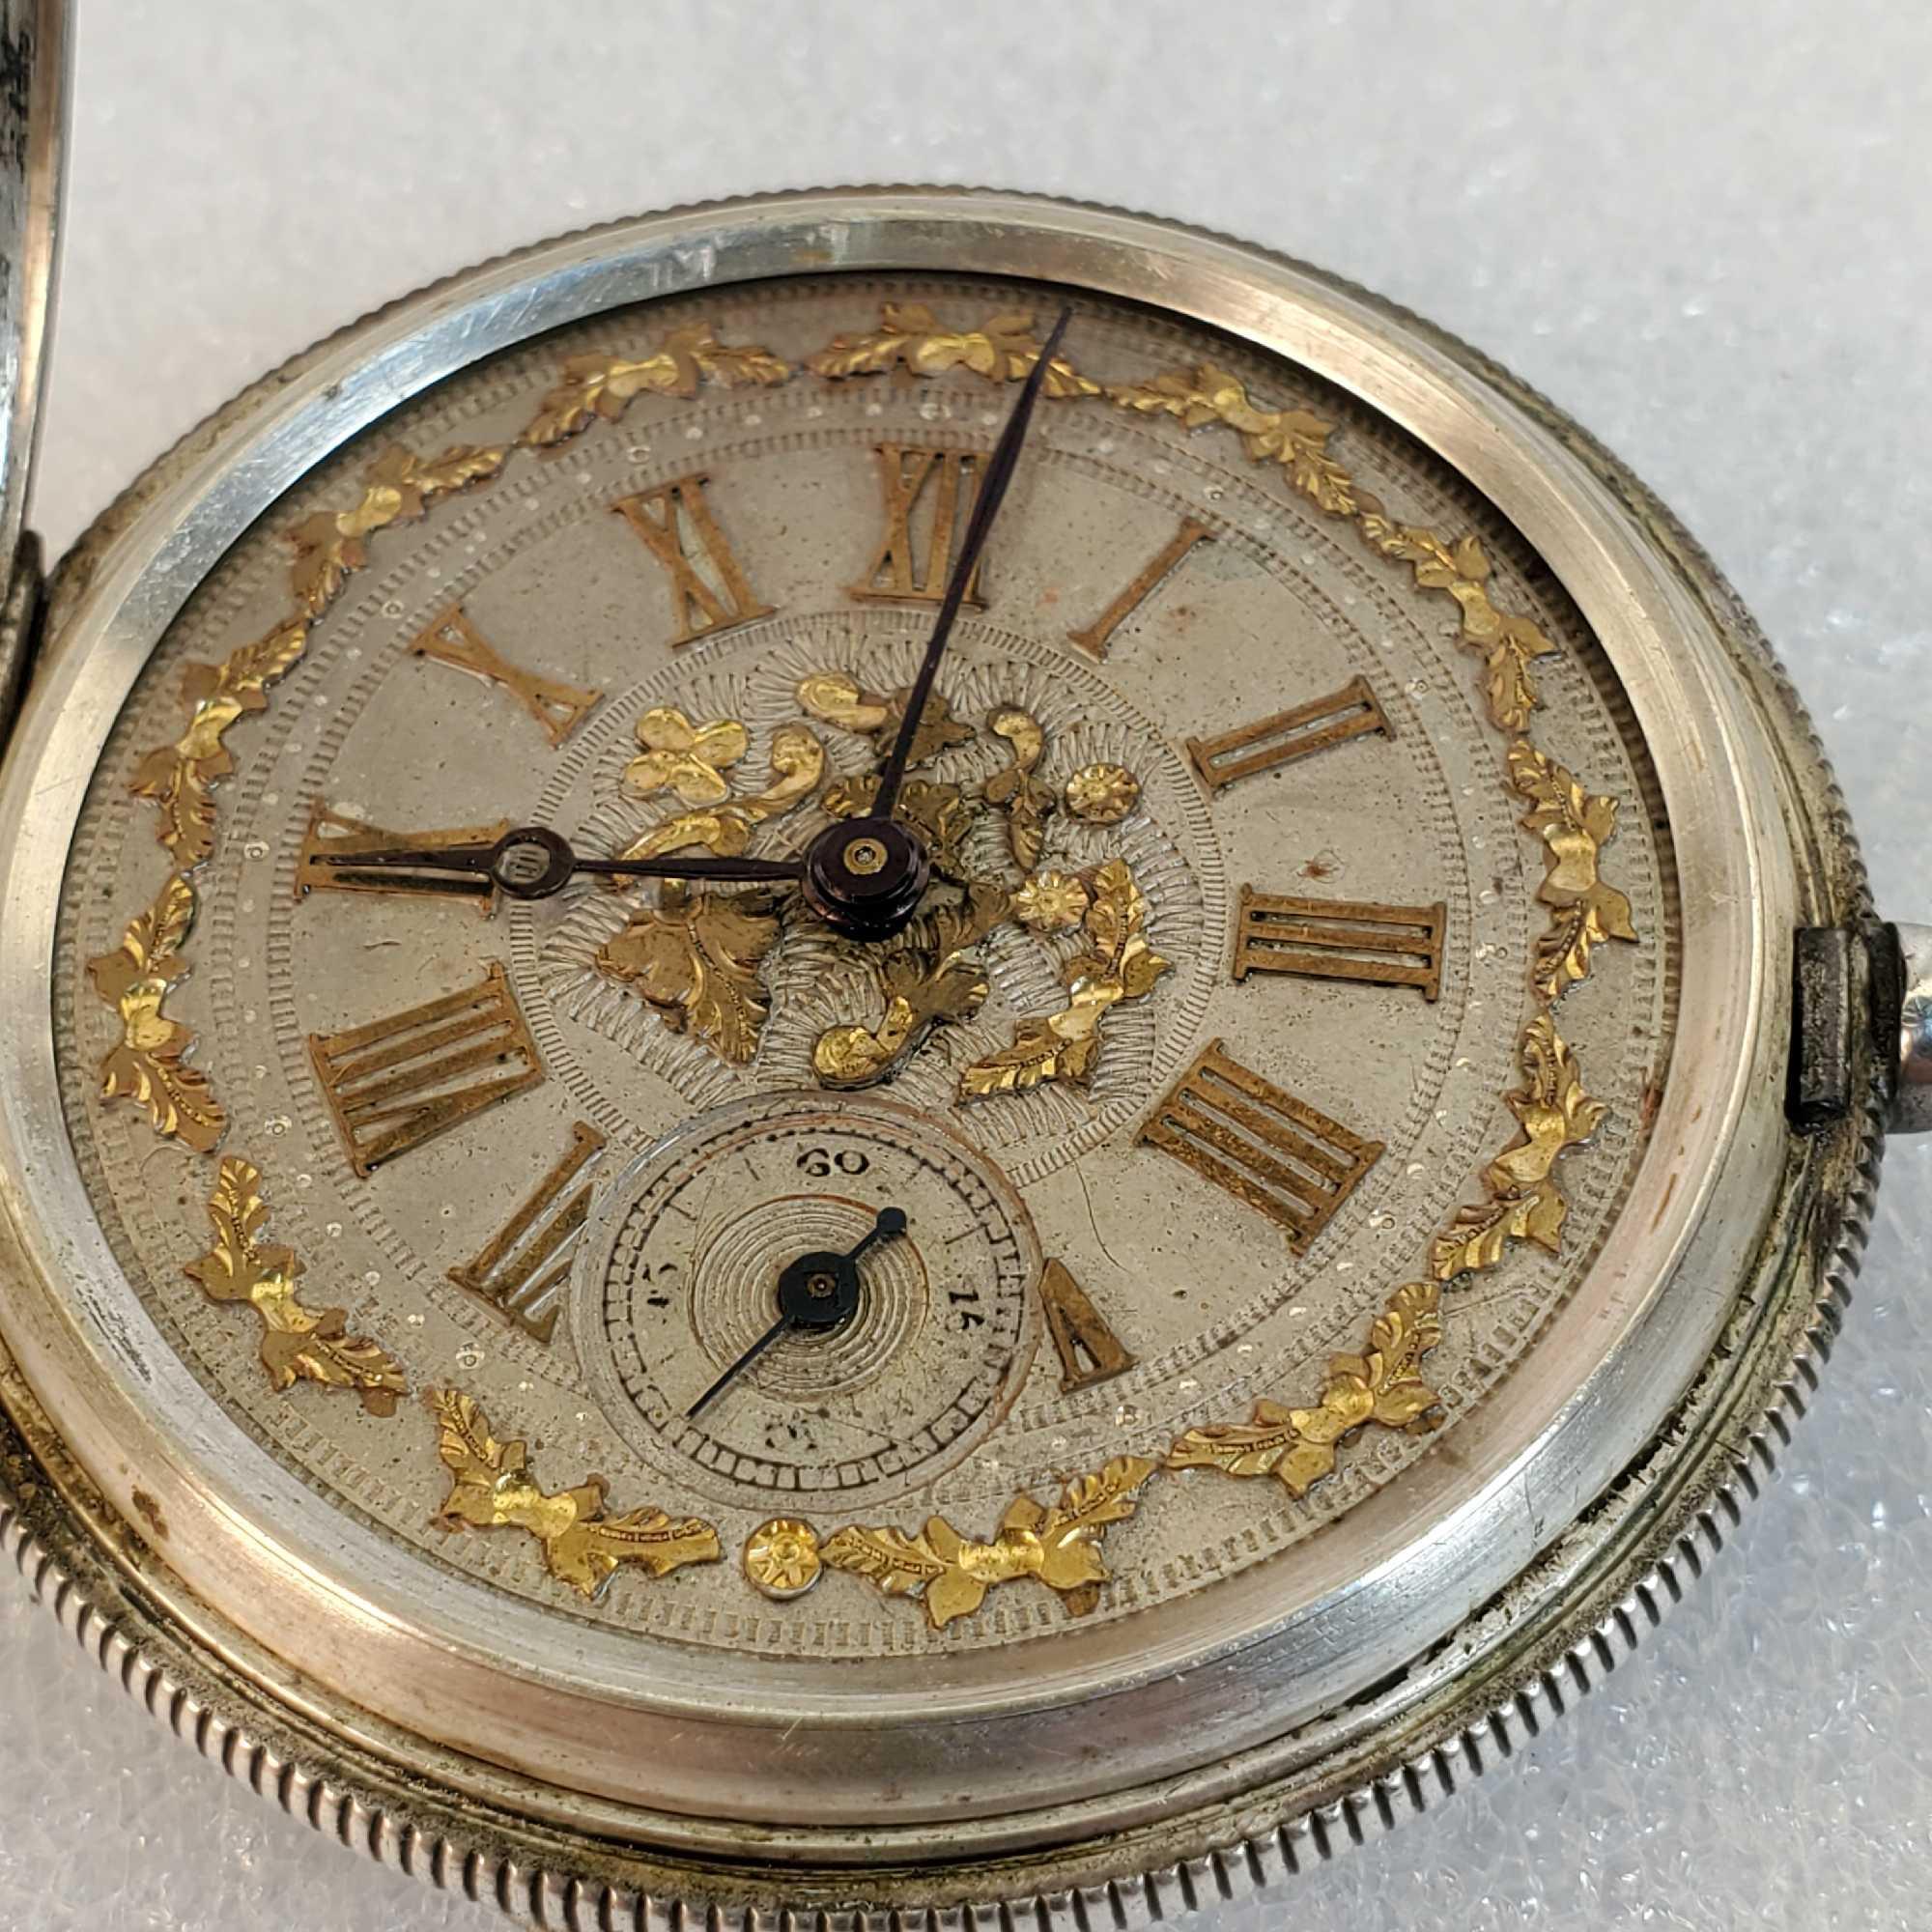 Antique Henry Beguelin Silver Pocket Watch Fancy Dial, Engraved Case